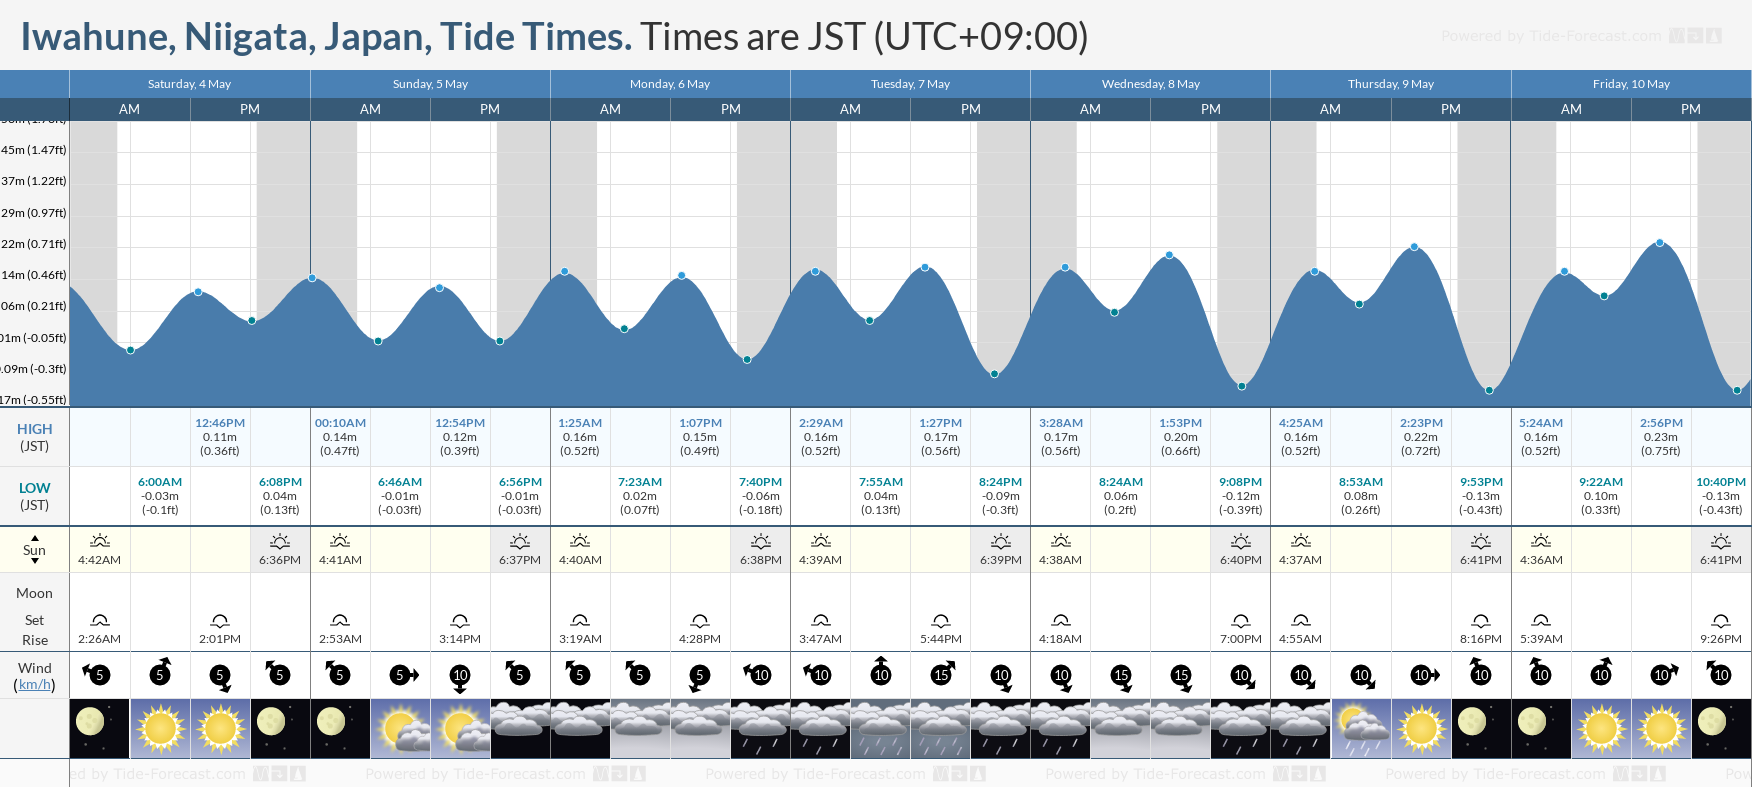 Iwahune, Niigata, Japan Tide Chart including high and low tide tide times for the next 7 days